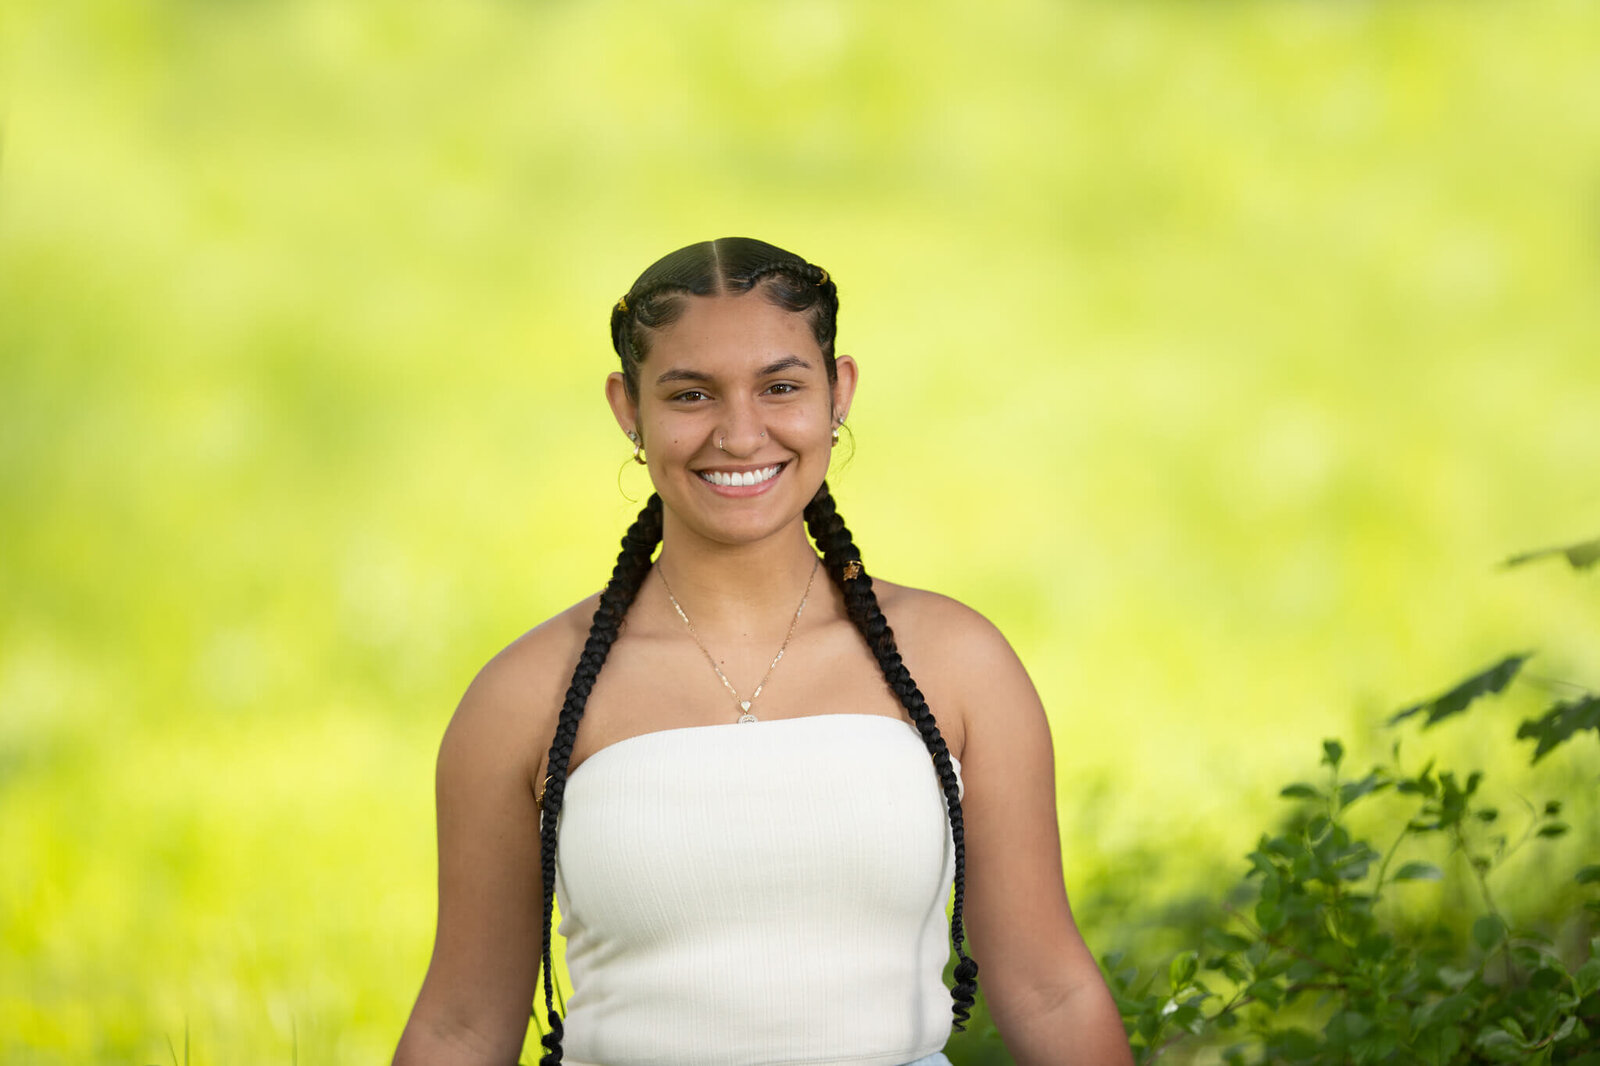 High school senior portrait photography in Clinton MA  of female in a white top smiling with yellow background